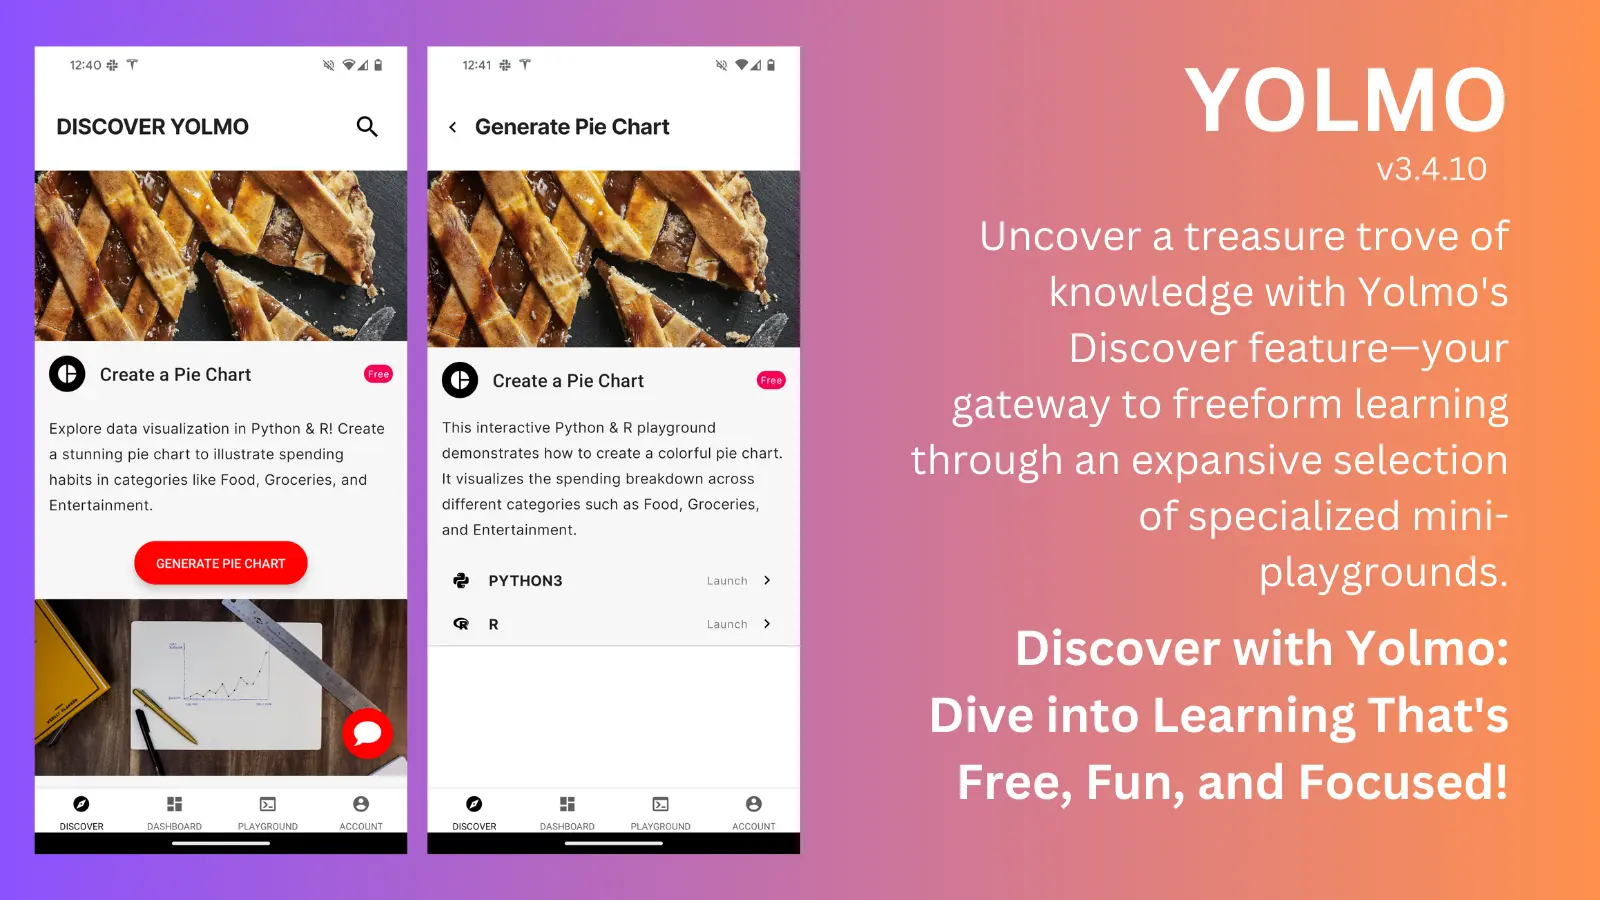 Uncover a treasure trove of knowledge with Yolmo’s Discover feature—your gateway to freeform learning through an expansive selection of specialized mini-playgrounds.